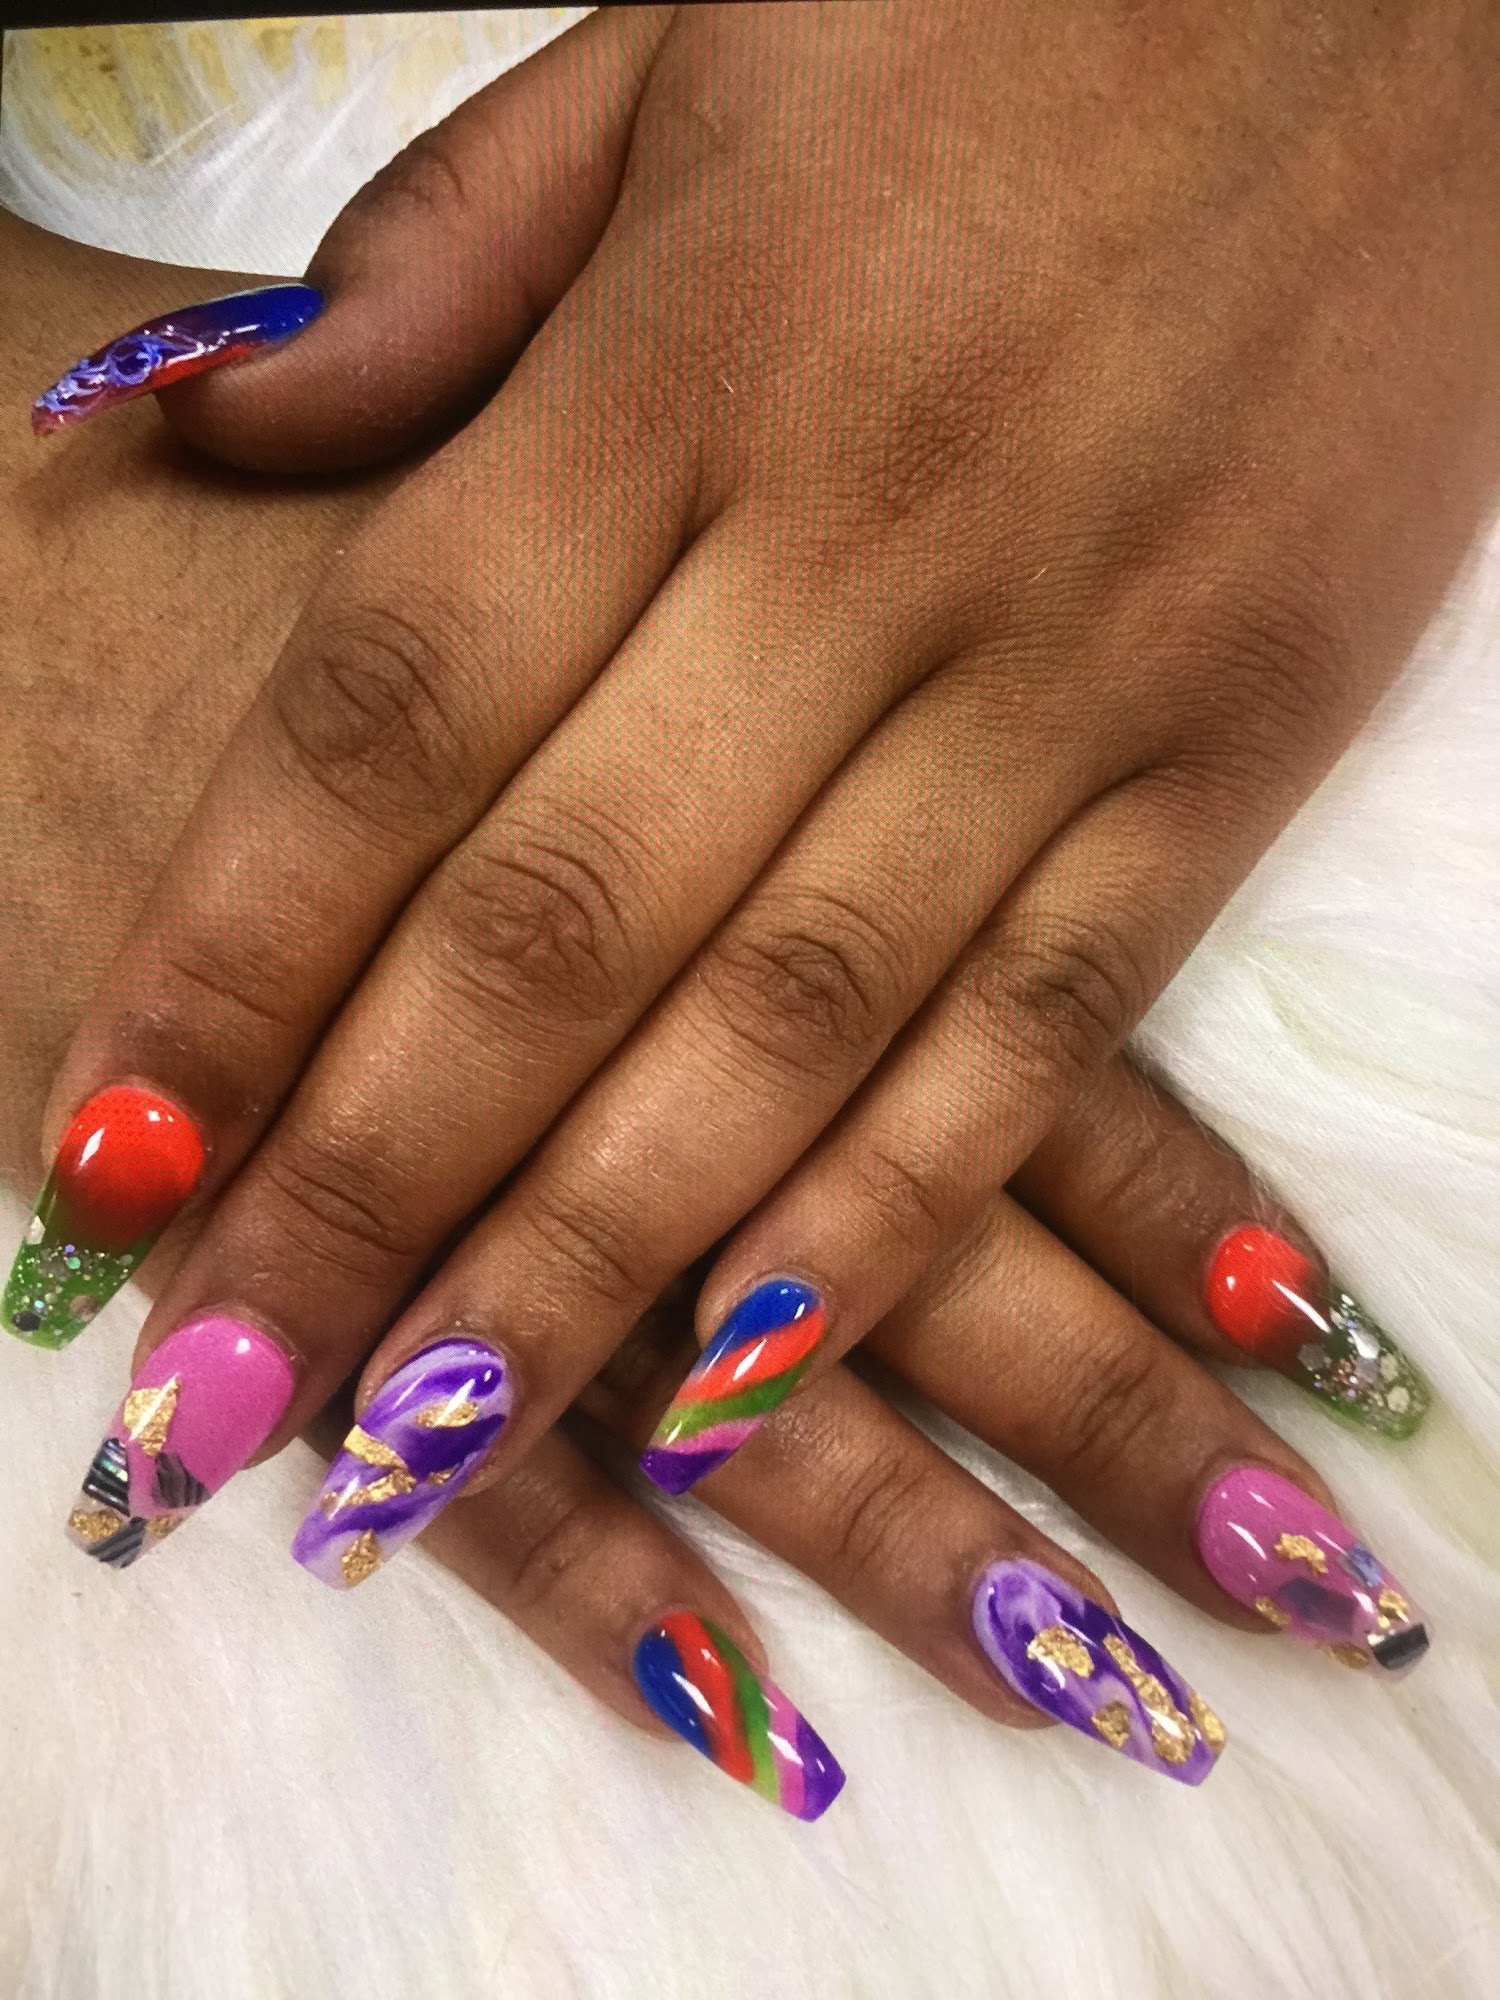 Le Nails Spa 803 1st St W, Independence Iowa 50644